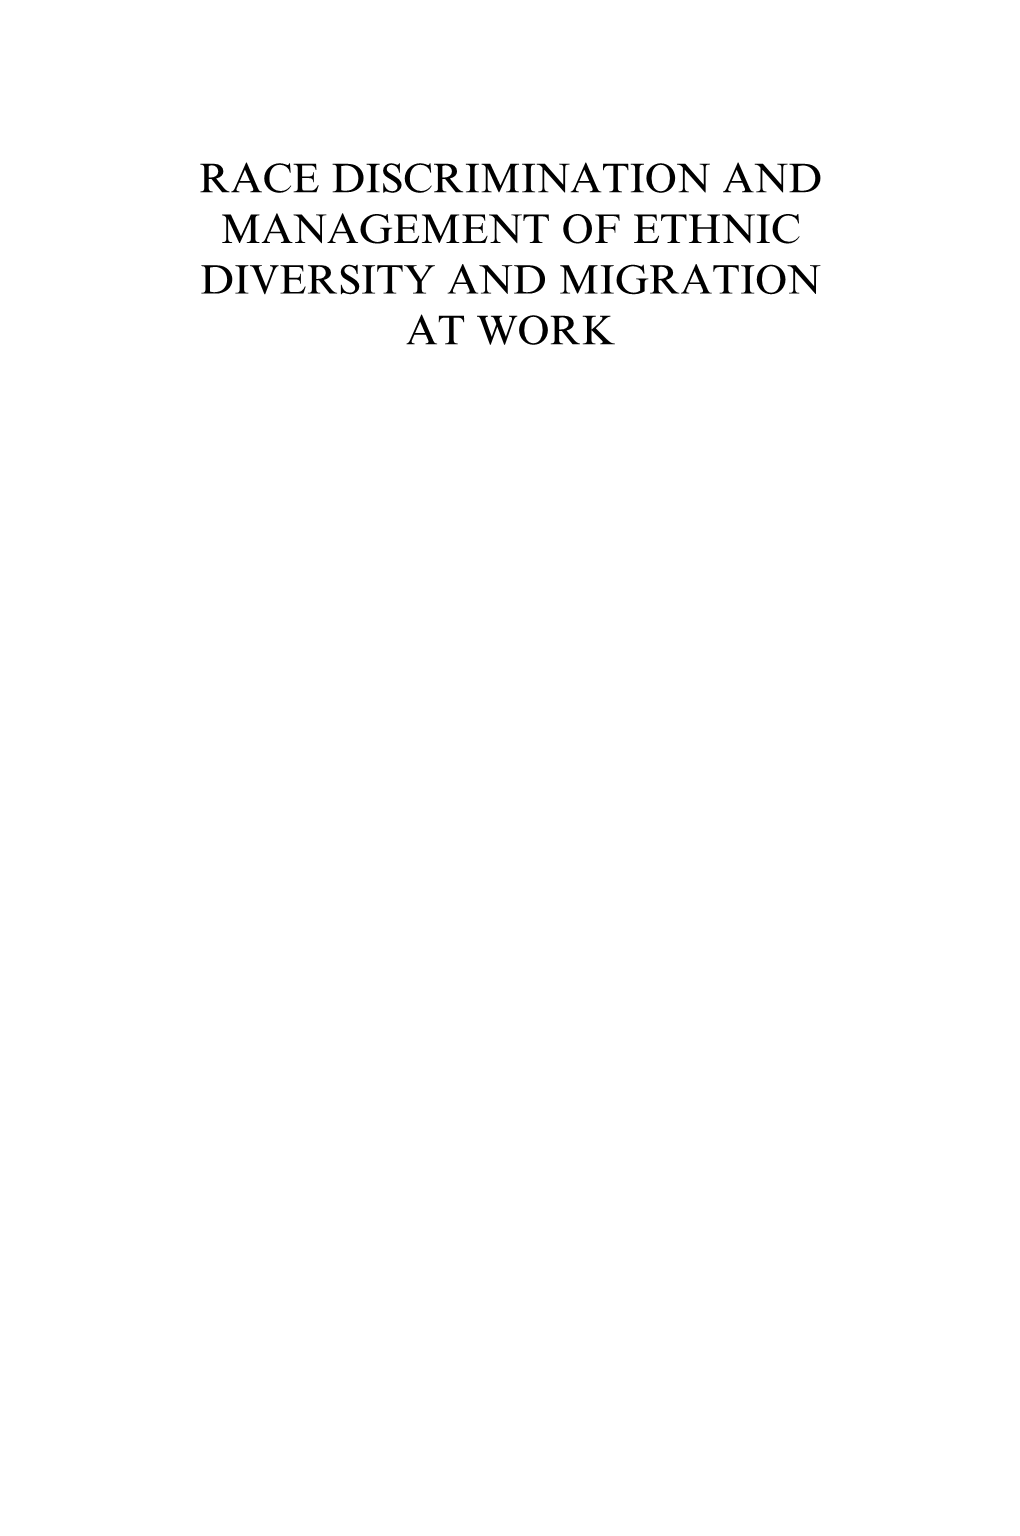 RACE DISCRIMINATION and MANAGEMENT of ETHNIC DIVERSITY and MIGRATION at WORK INTERNATIONAL PERSPECTIVES on EQUALITY, DIVERSITY and INCLUSION Series Editor: Mustafa F